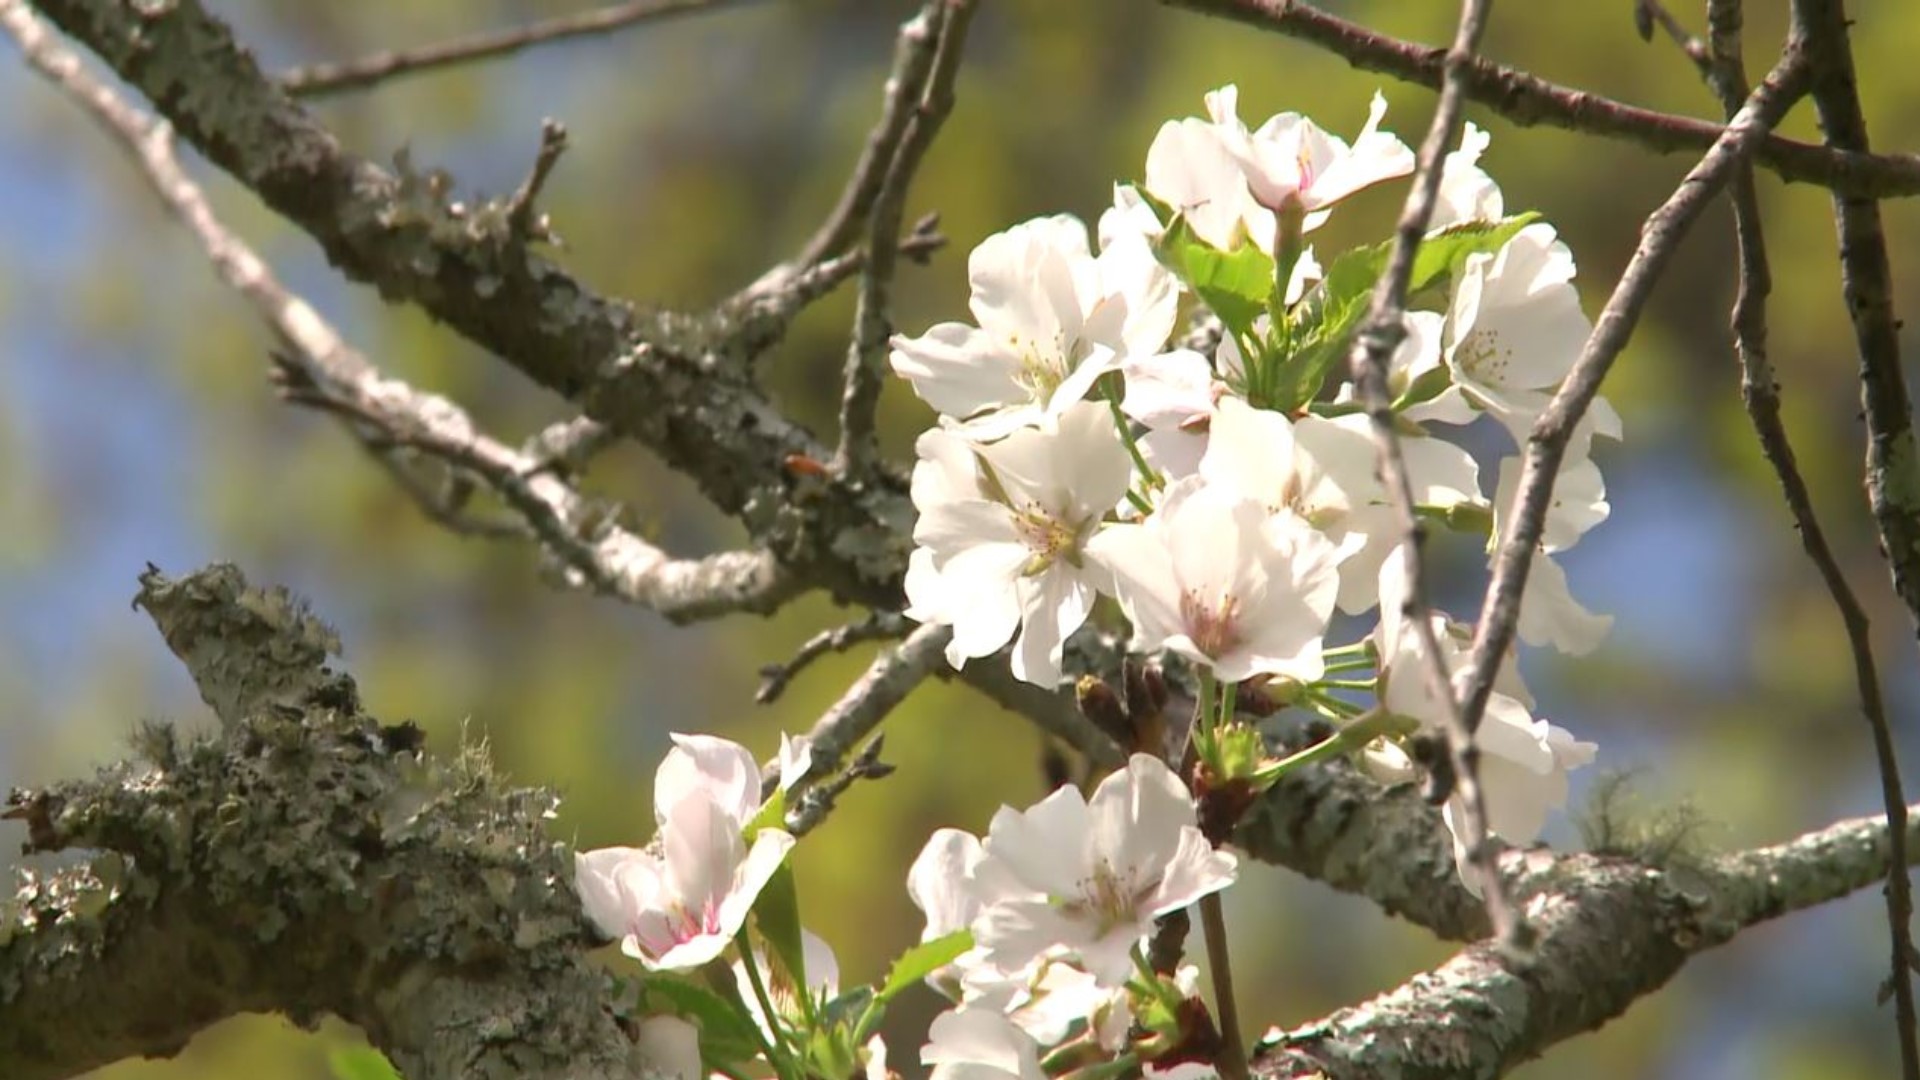 Carolyn Crayton founded the International Cherry Blossom Festival, and she played a major role in the distribution of cherry blossom trees in Macon.